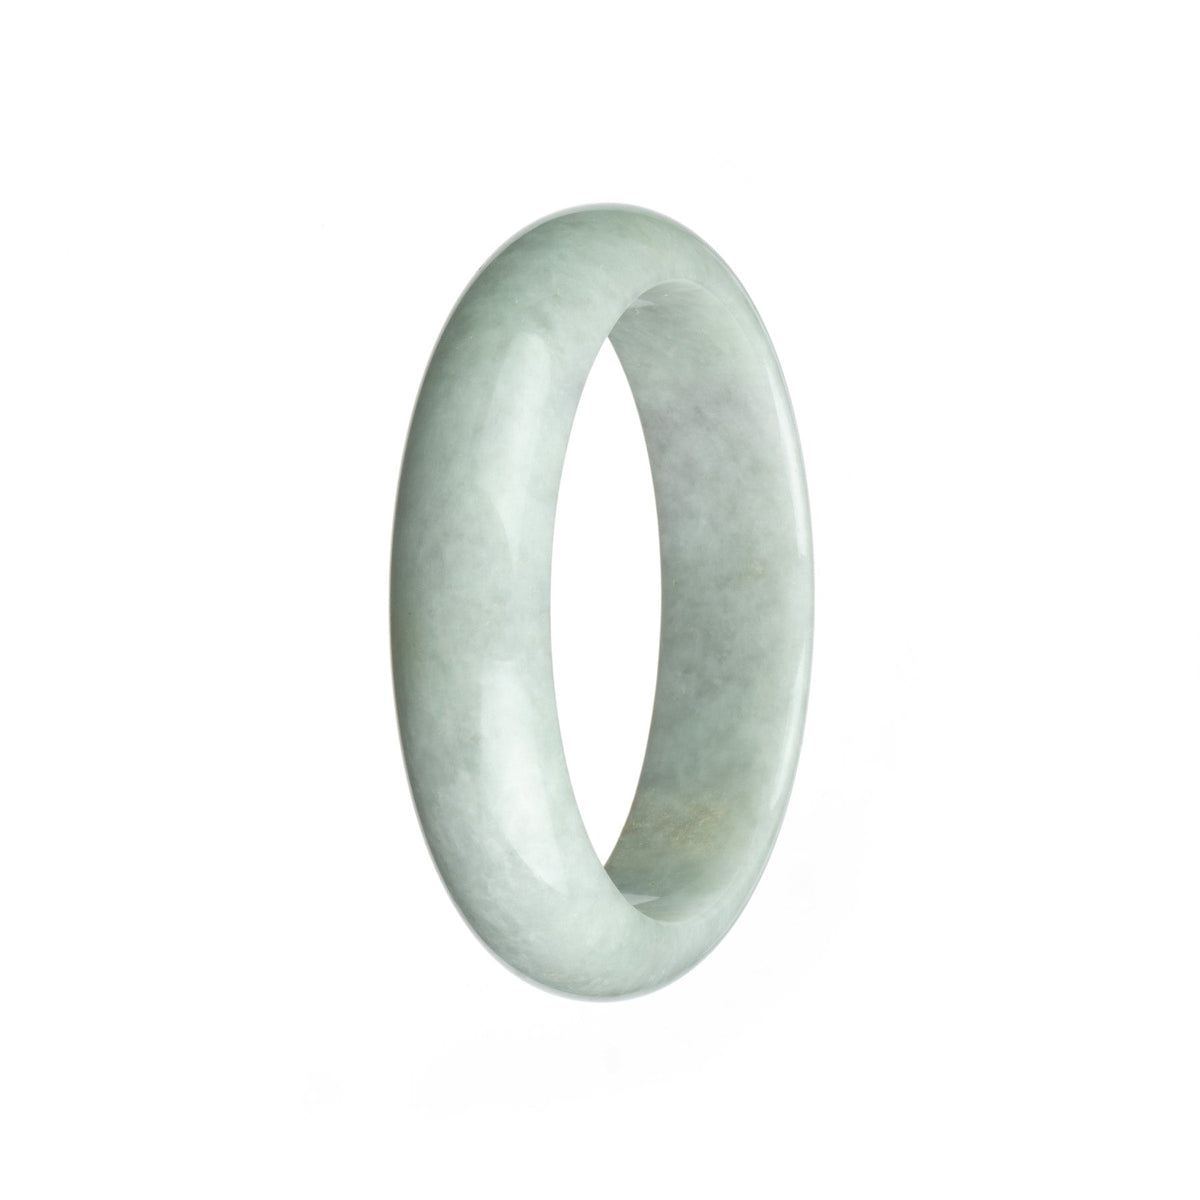 Authentic Type A White Jade Bangle - 58mm Half Moon